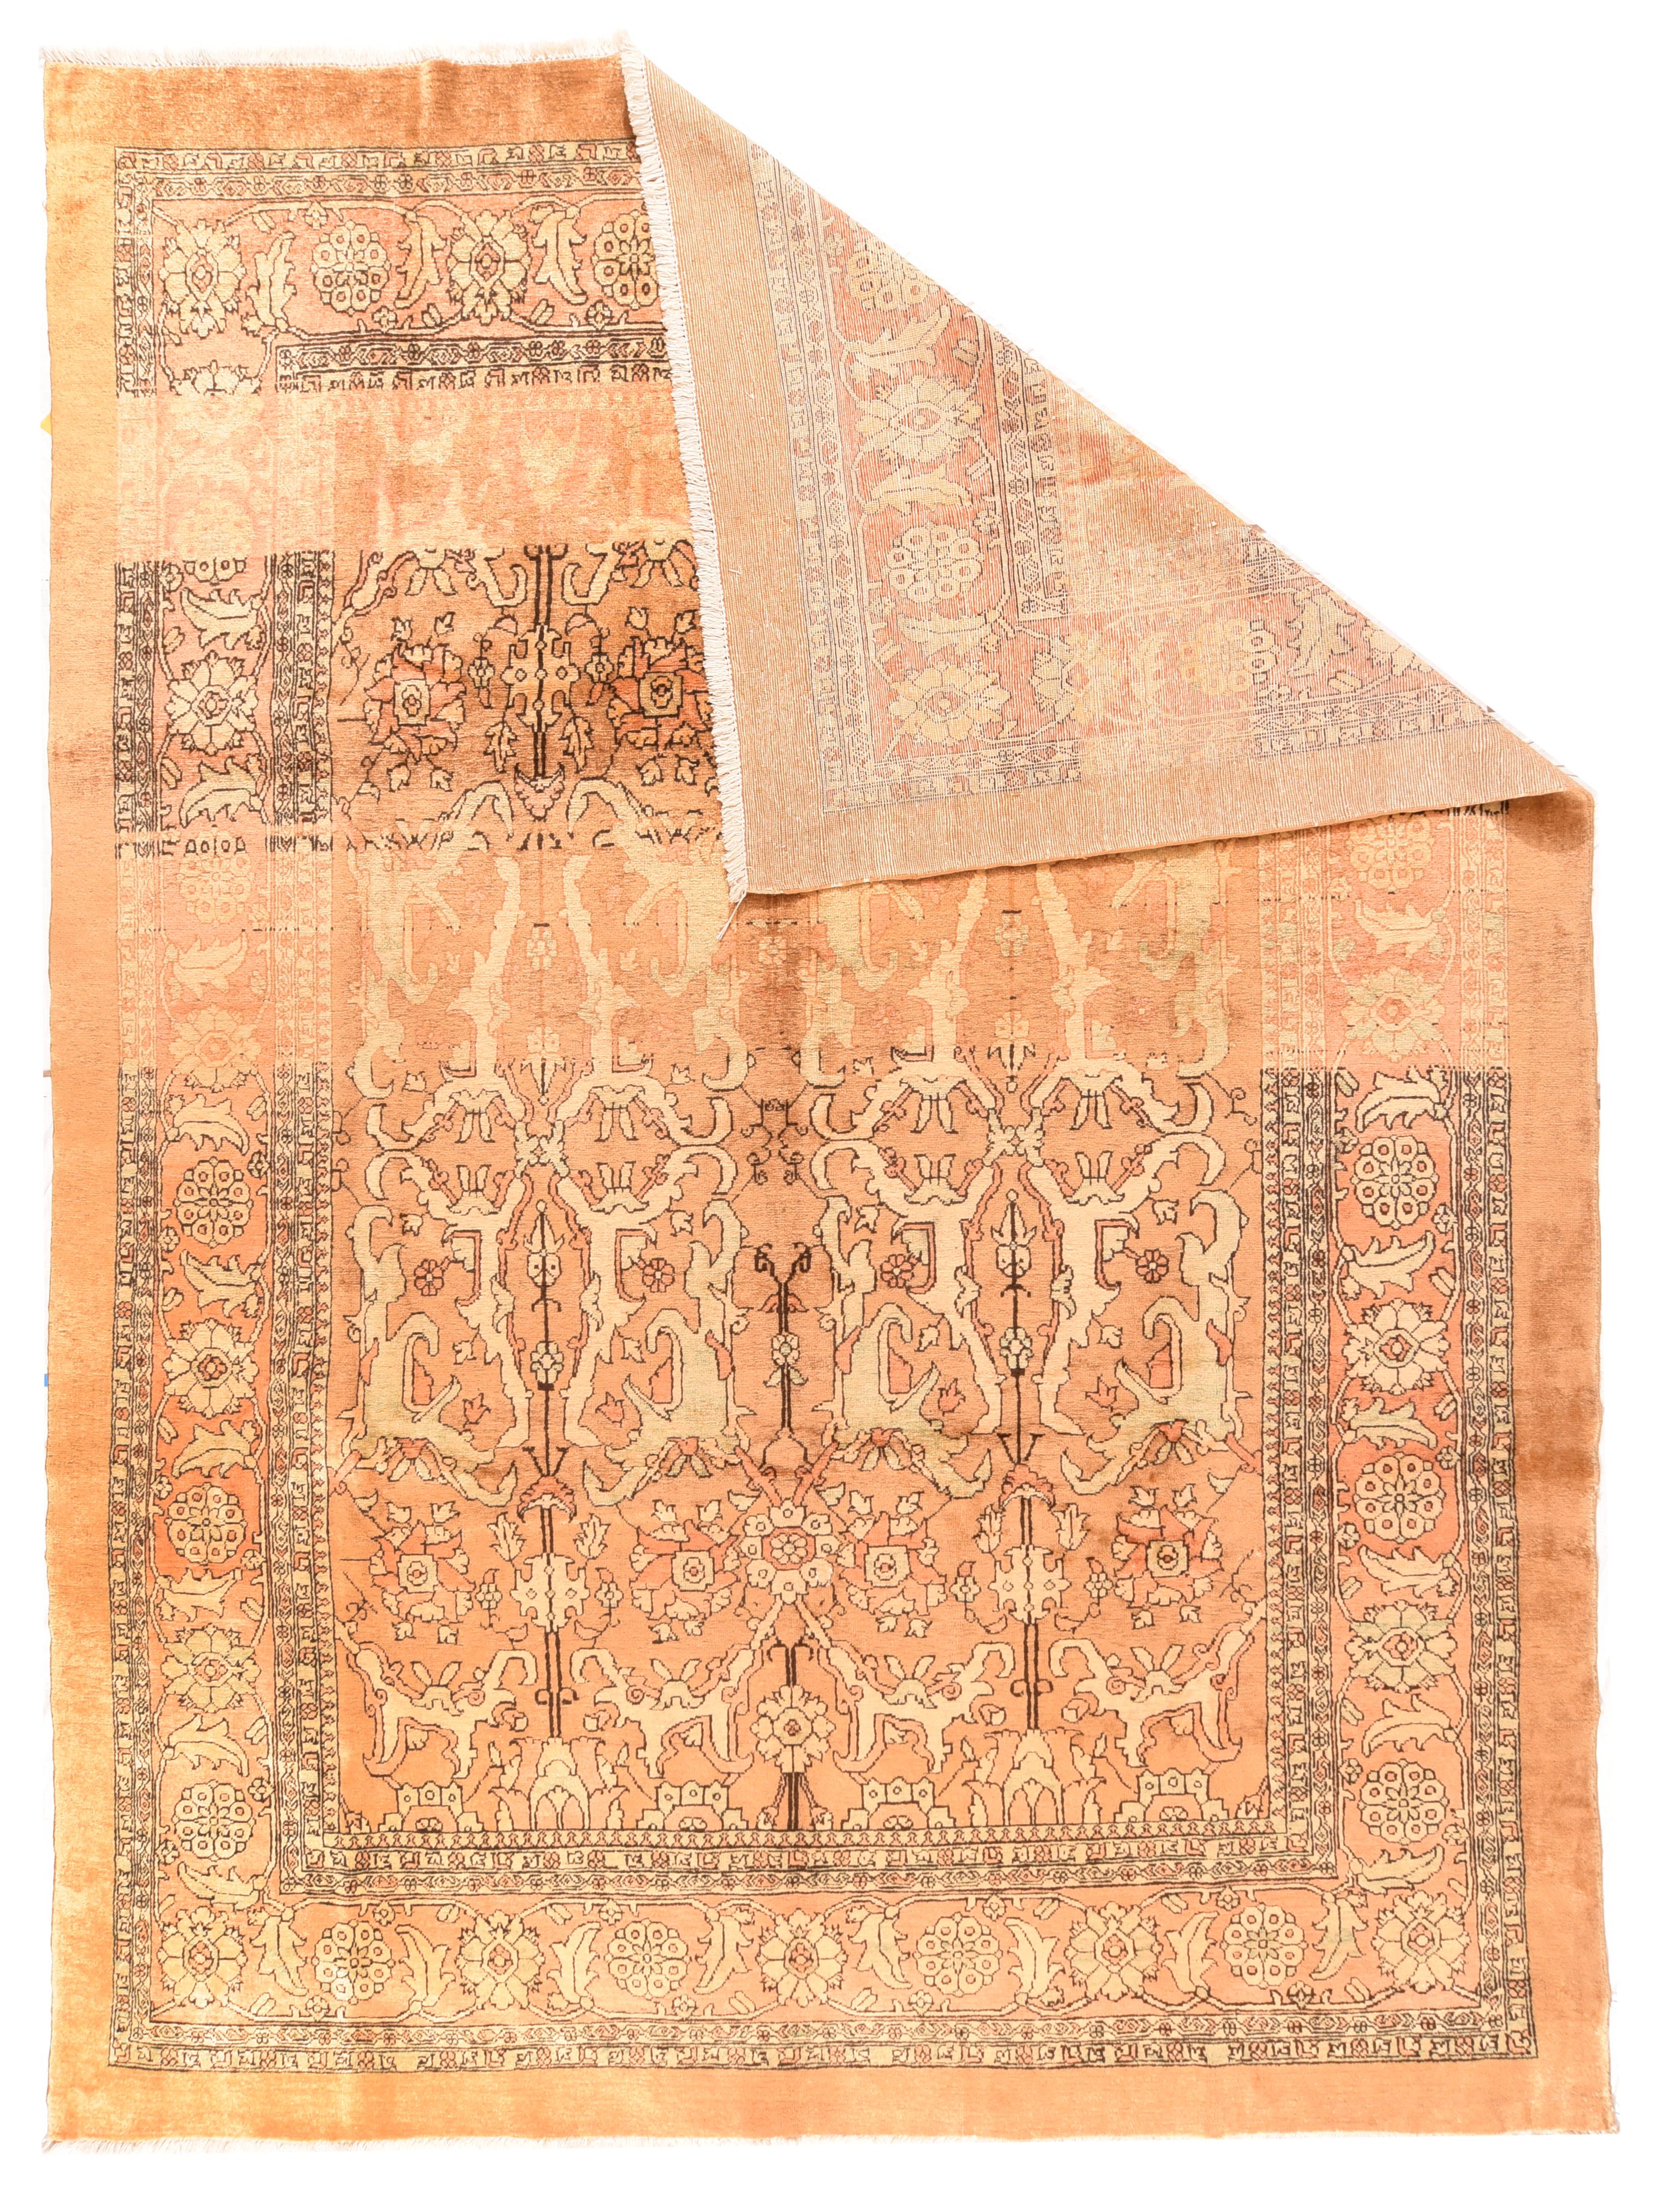 The golden camel field is clearly panel abrashed and displays a three column allover palmette pattern Camel tan rosette and barbed lancet leaf border and a plain camel outermost strip. Moderate weave on cotton. Narrow palette with mellow general